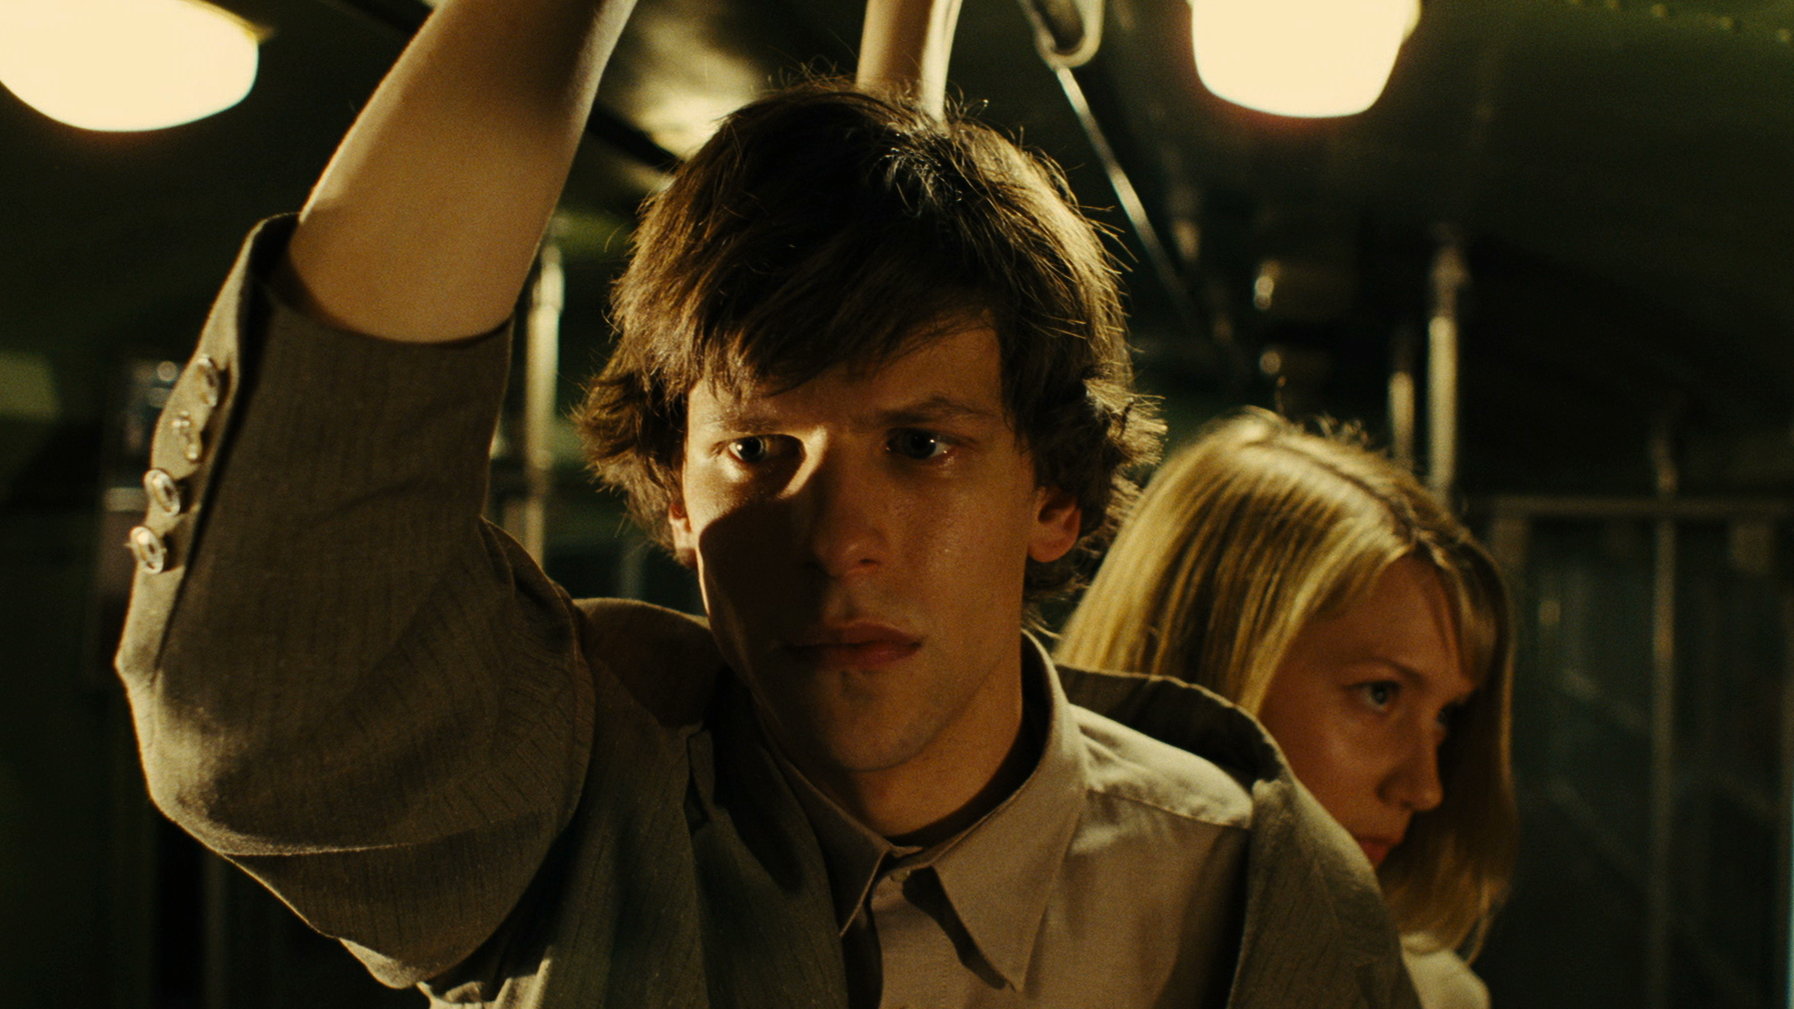 Jesse Eisenberg and Mia Wasikowska in The Double (2013)